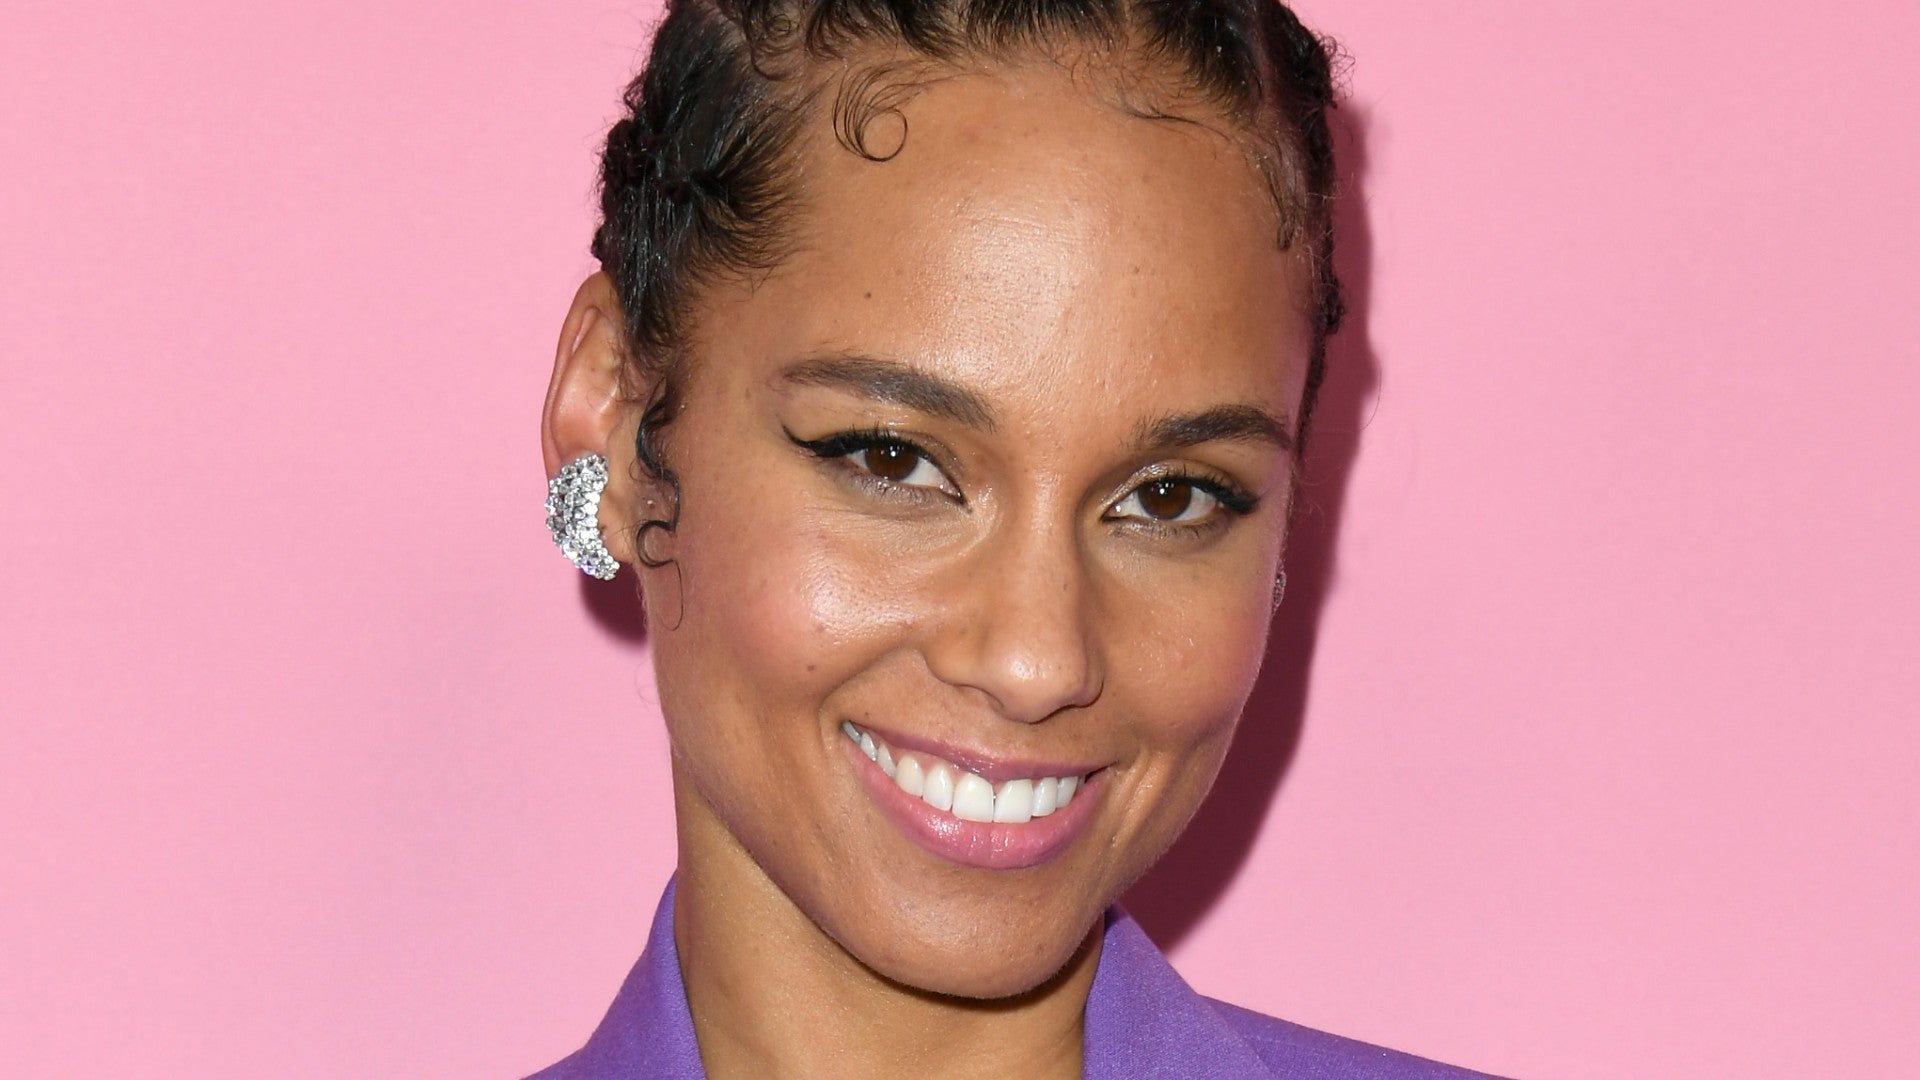 Alicia Keys Partners With e.l.f. To Launch A New Lifestyle Beauty Brand